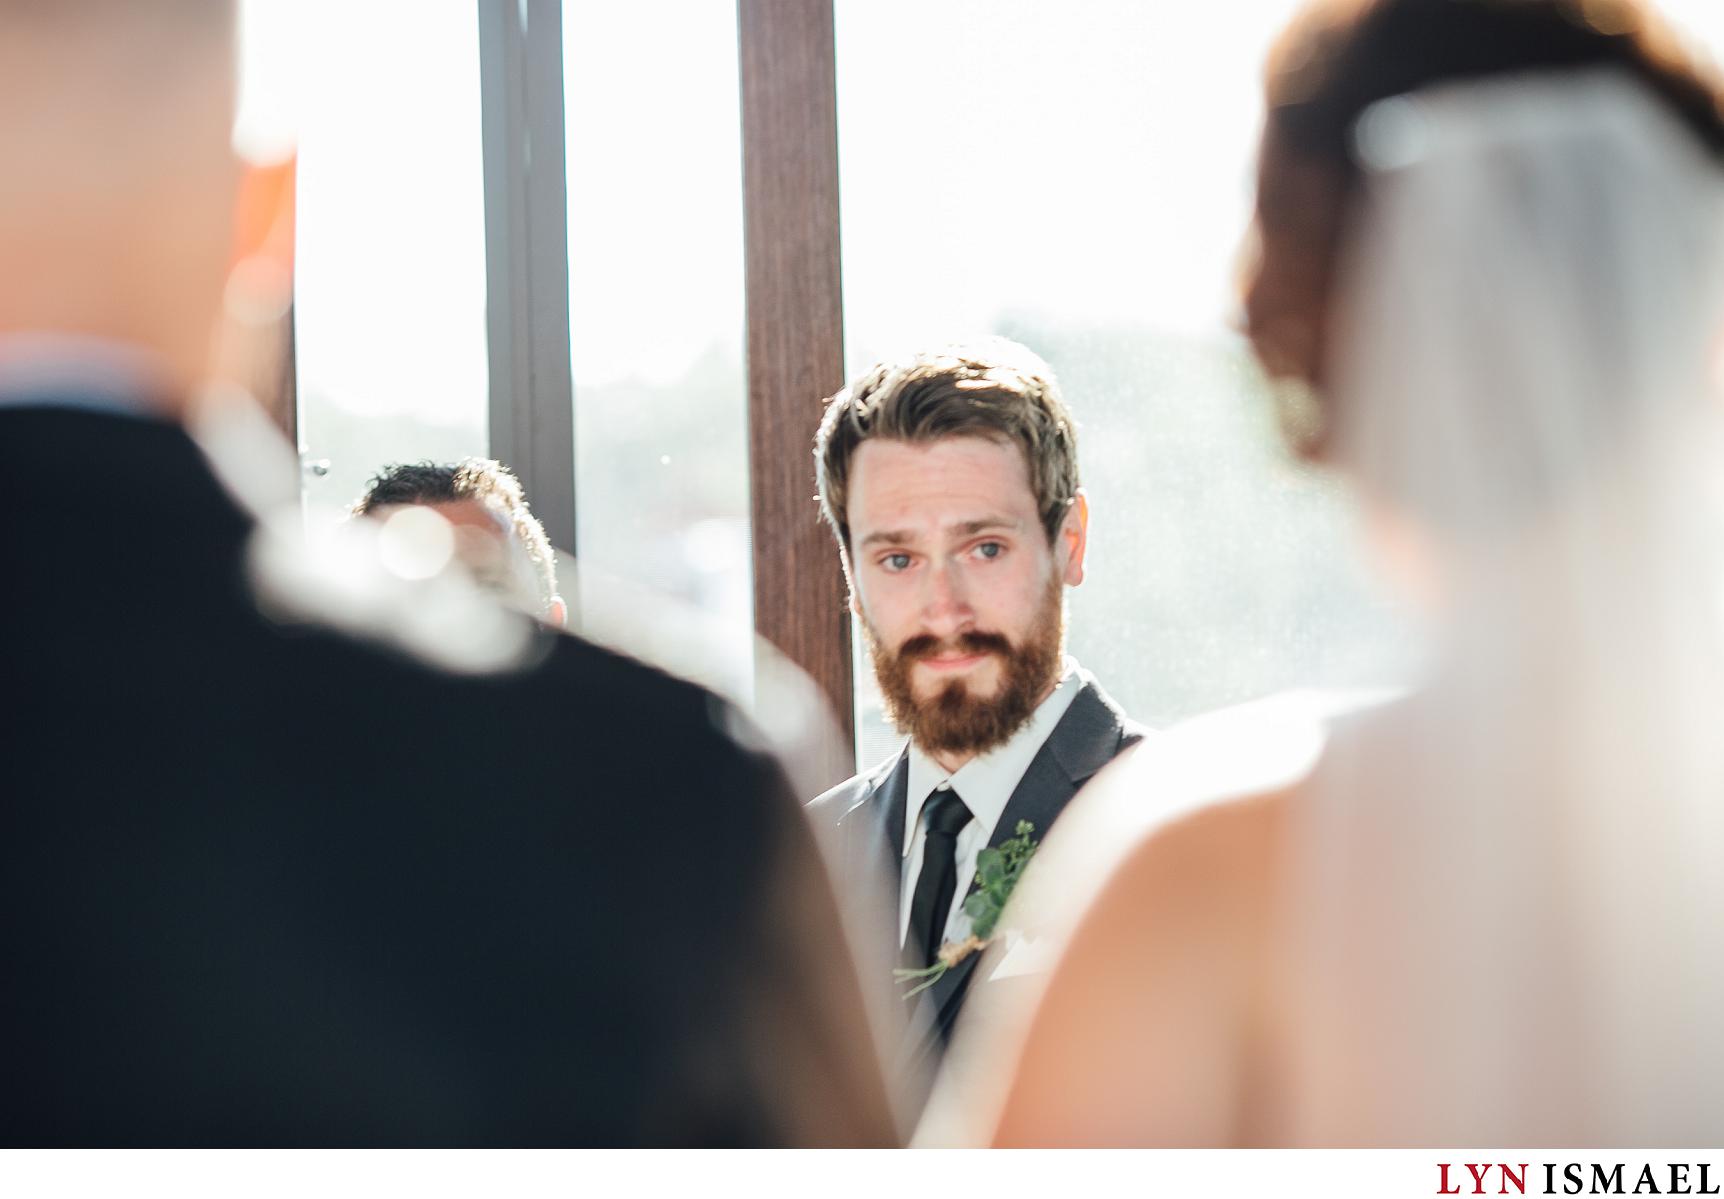 Groom becomes emotional as he watches his bride walk down the aisle.